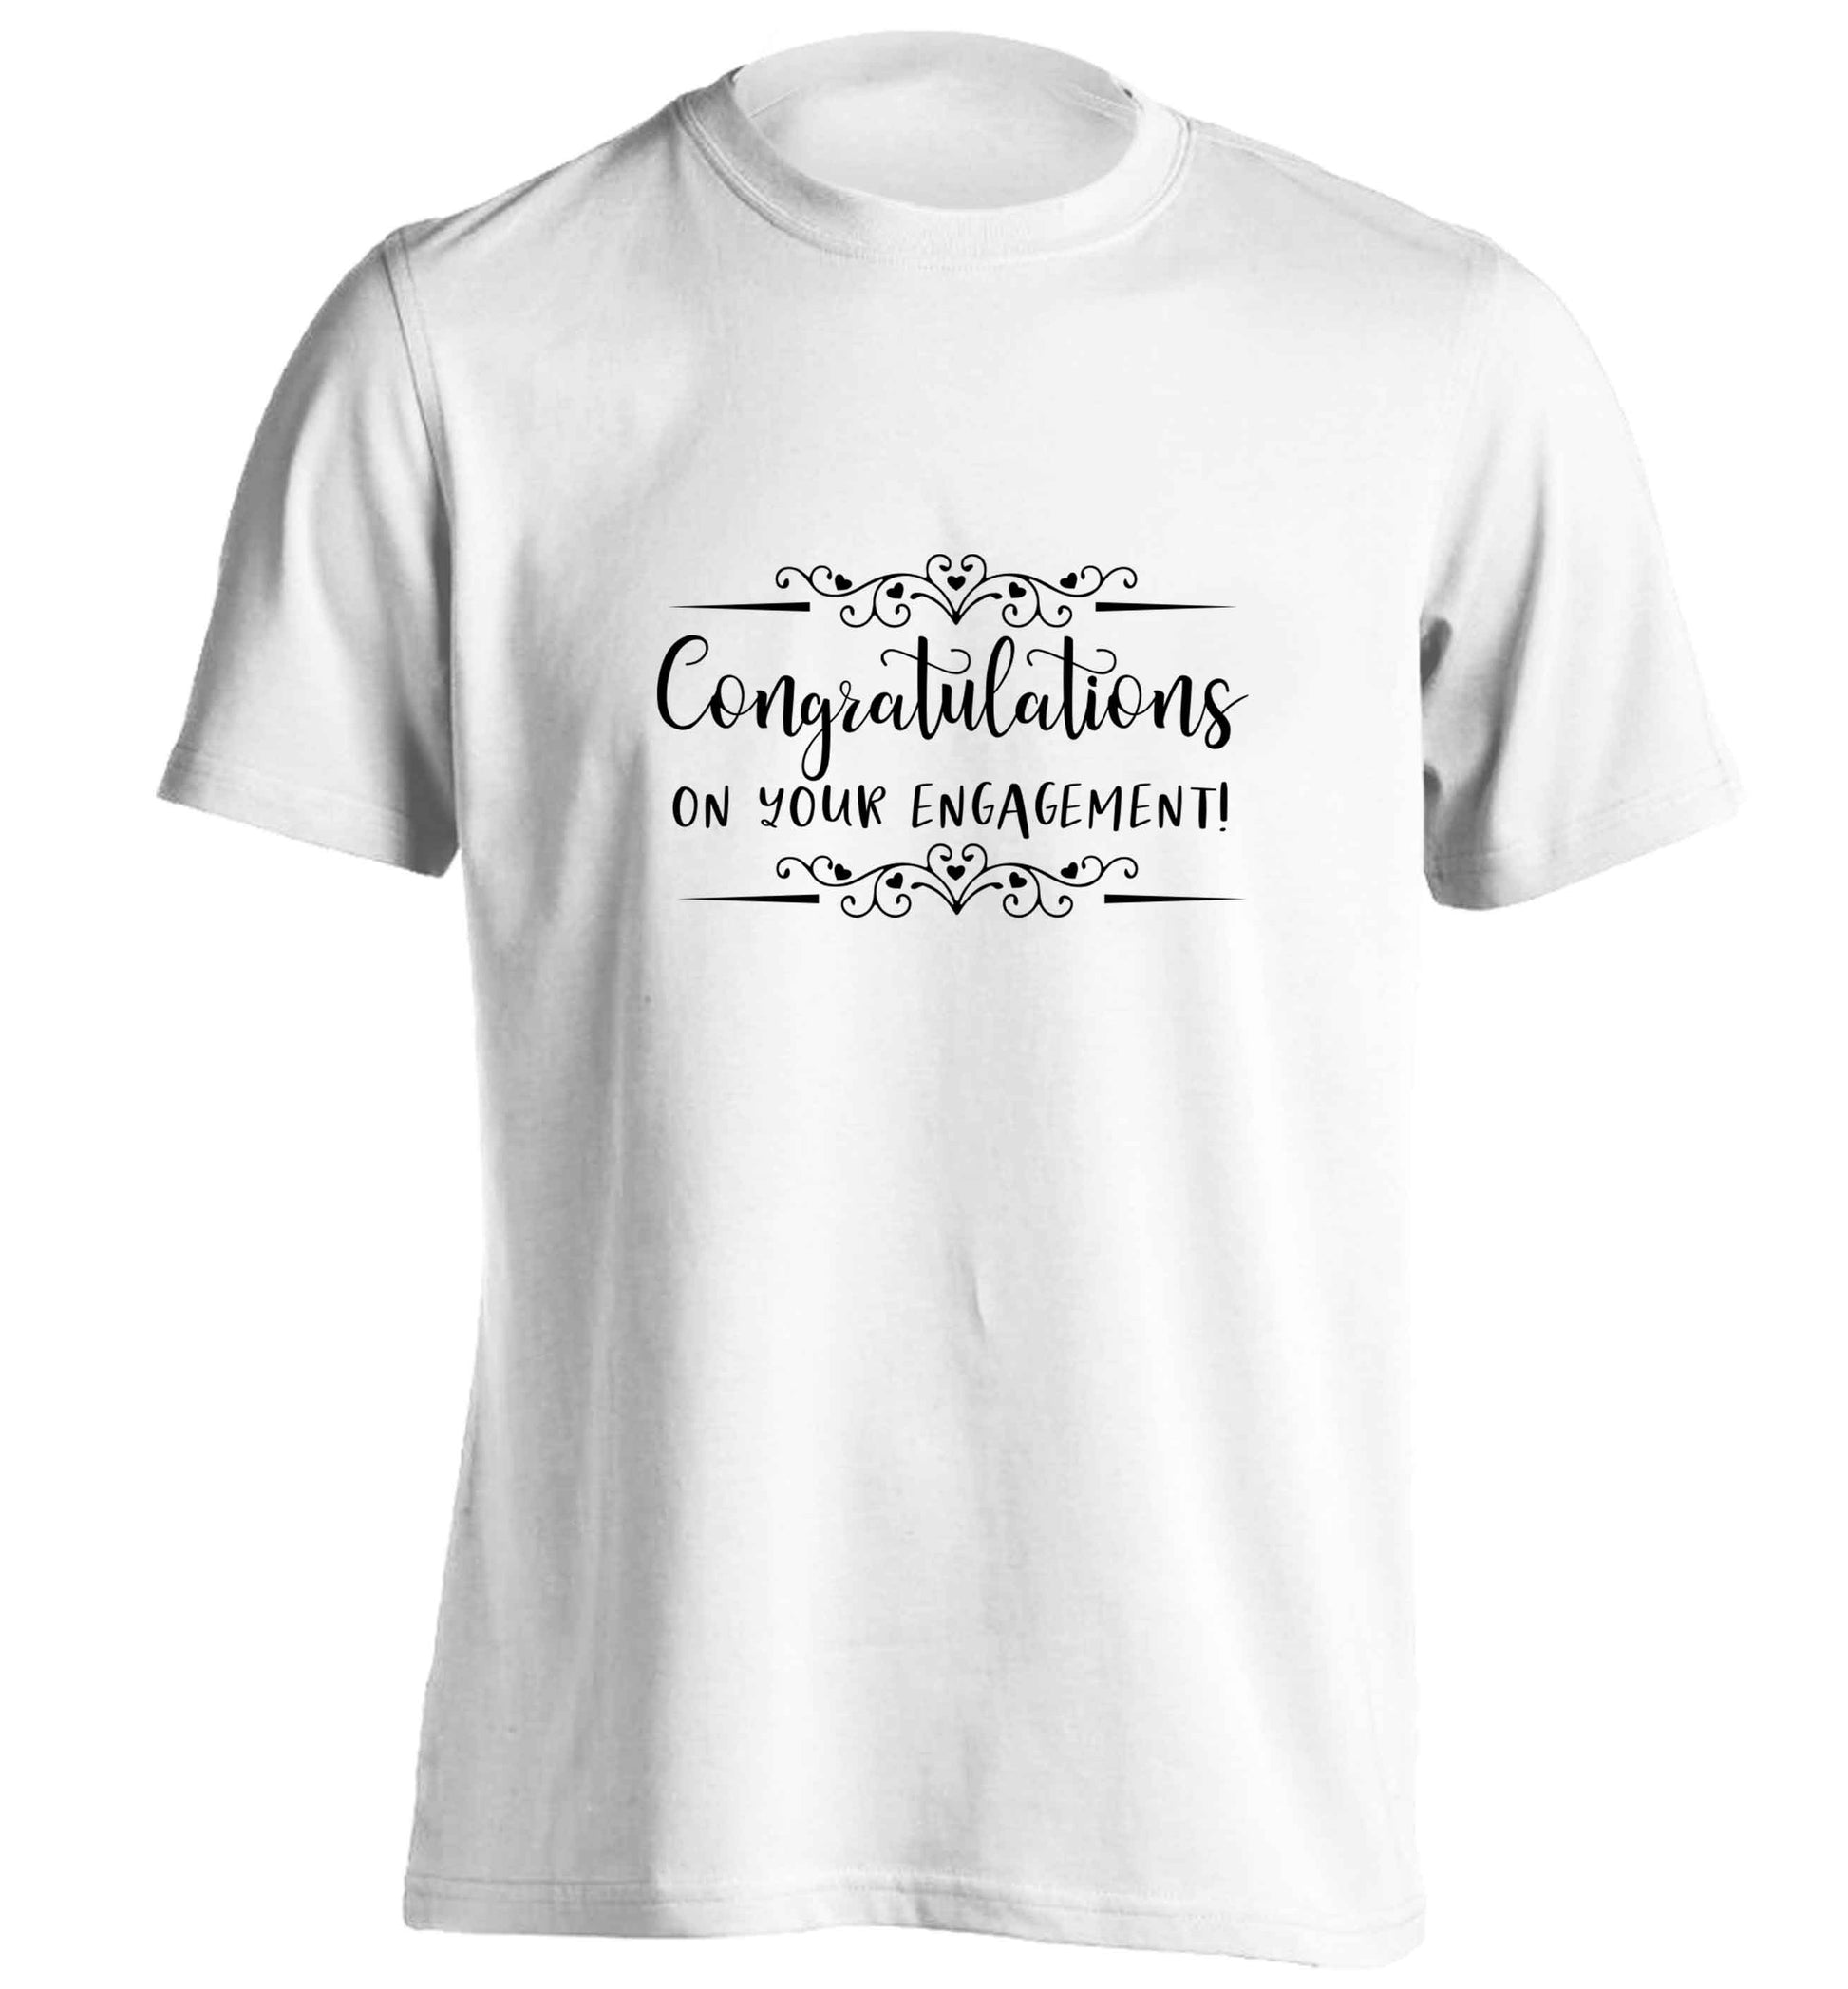 Congratulations on your engagement adults unisex white Tshirt 2XL